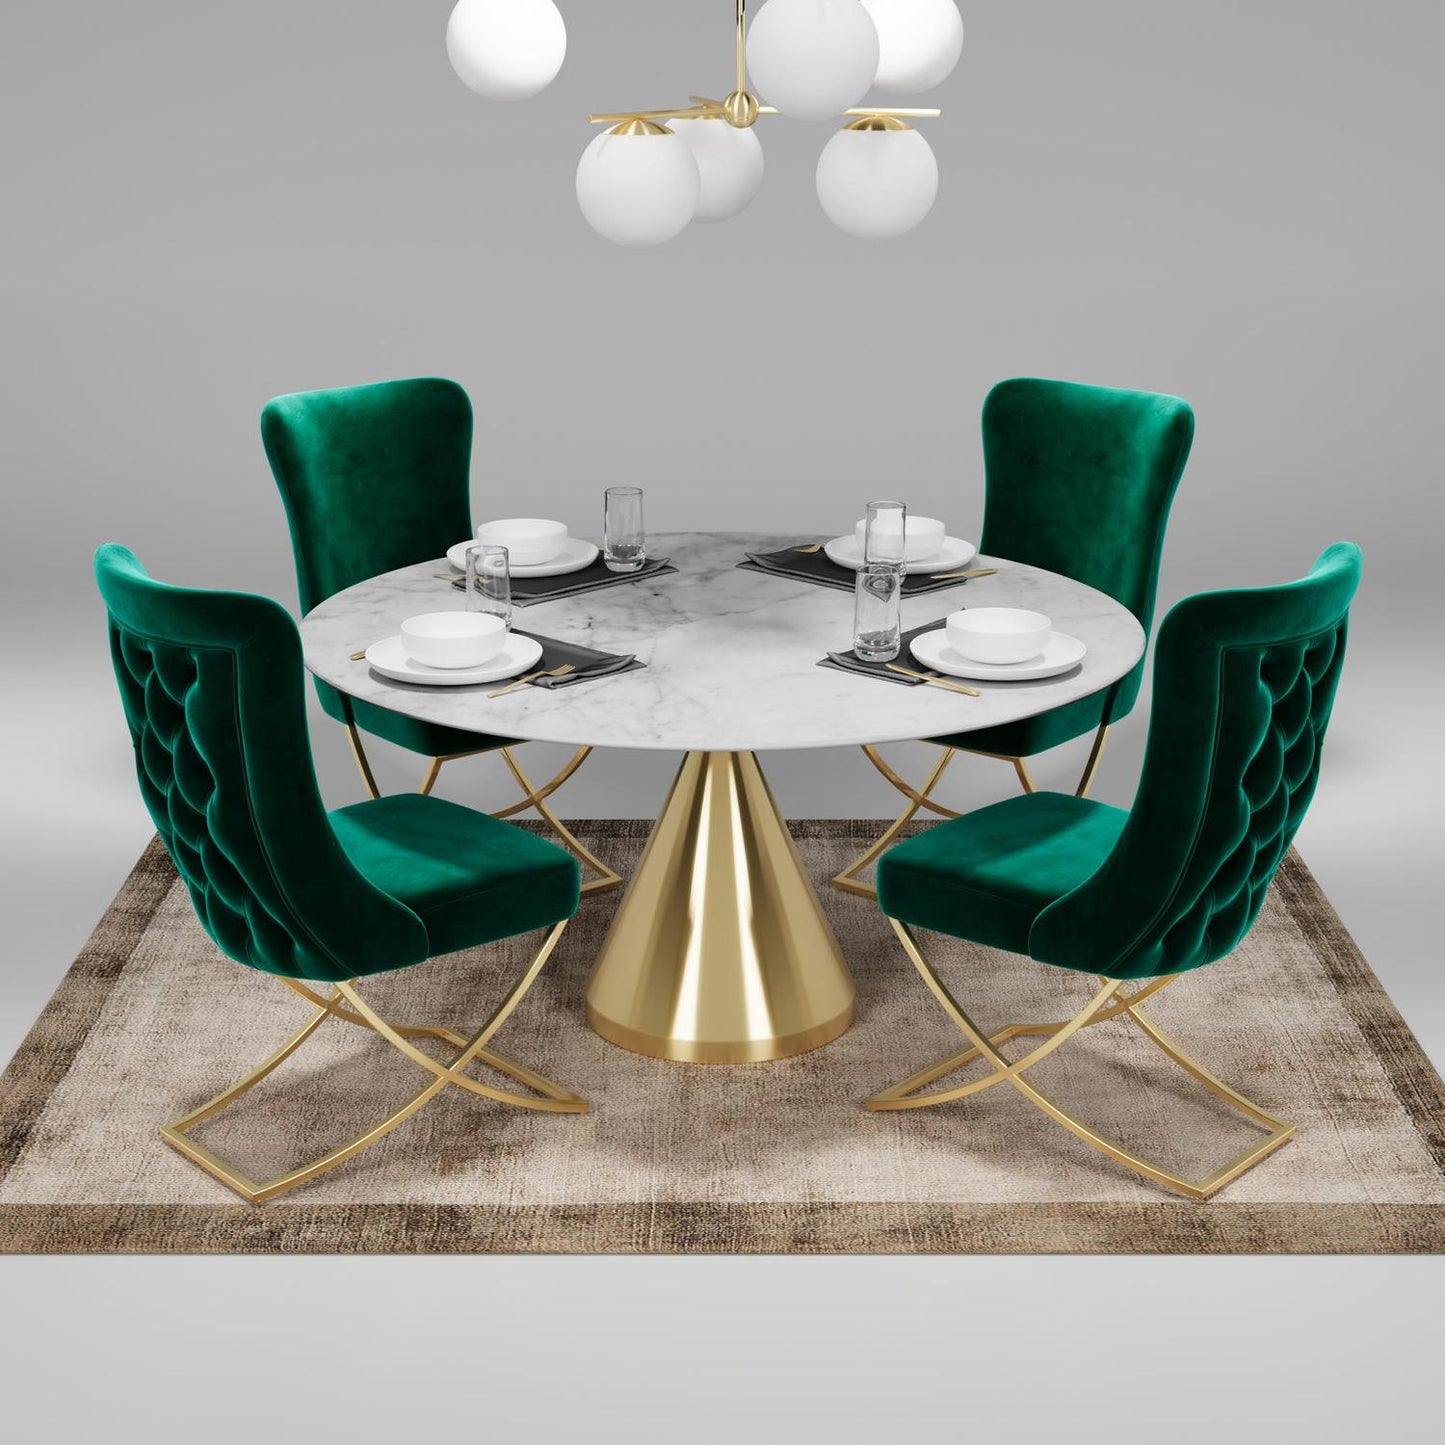 Sultan Collection Wing Back, Modern design, upholstered dining chair in Emerald Green with Gold Metal legs in a dining room with set of four chairs around a round table.